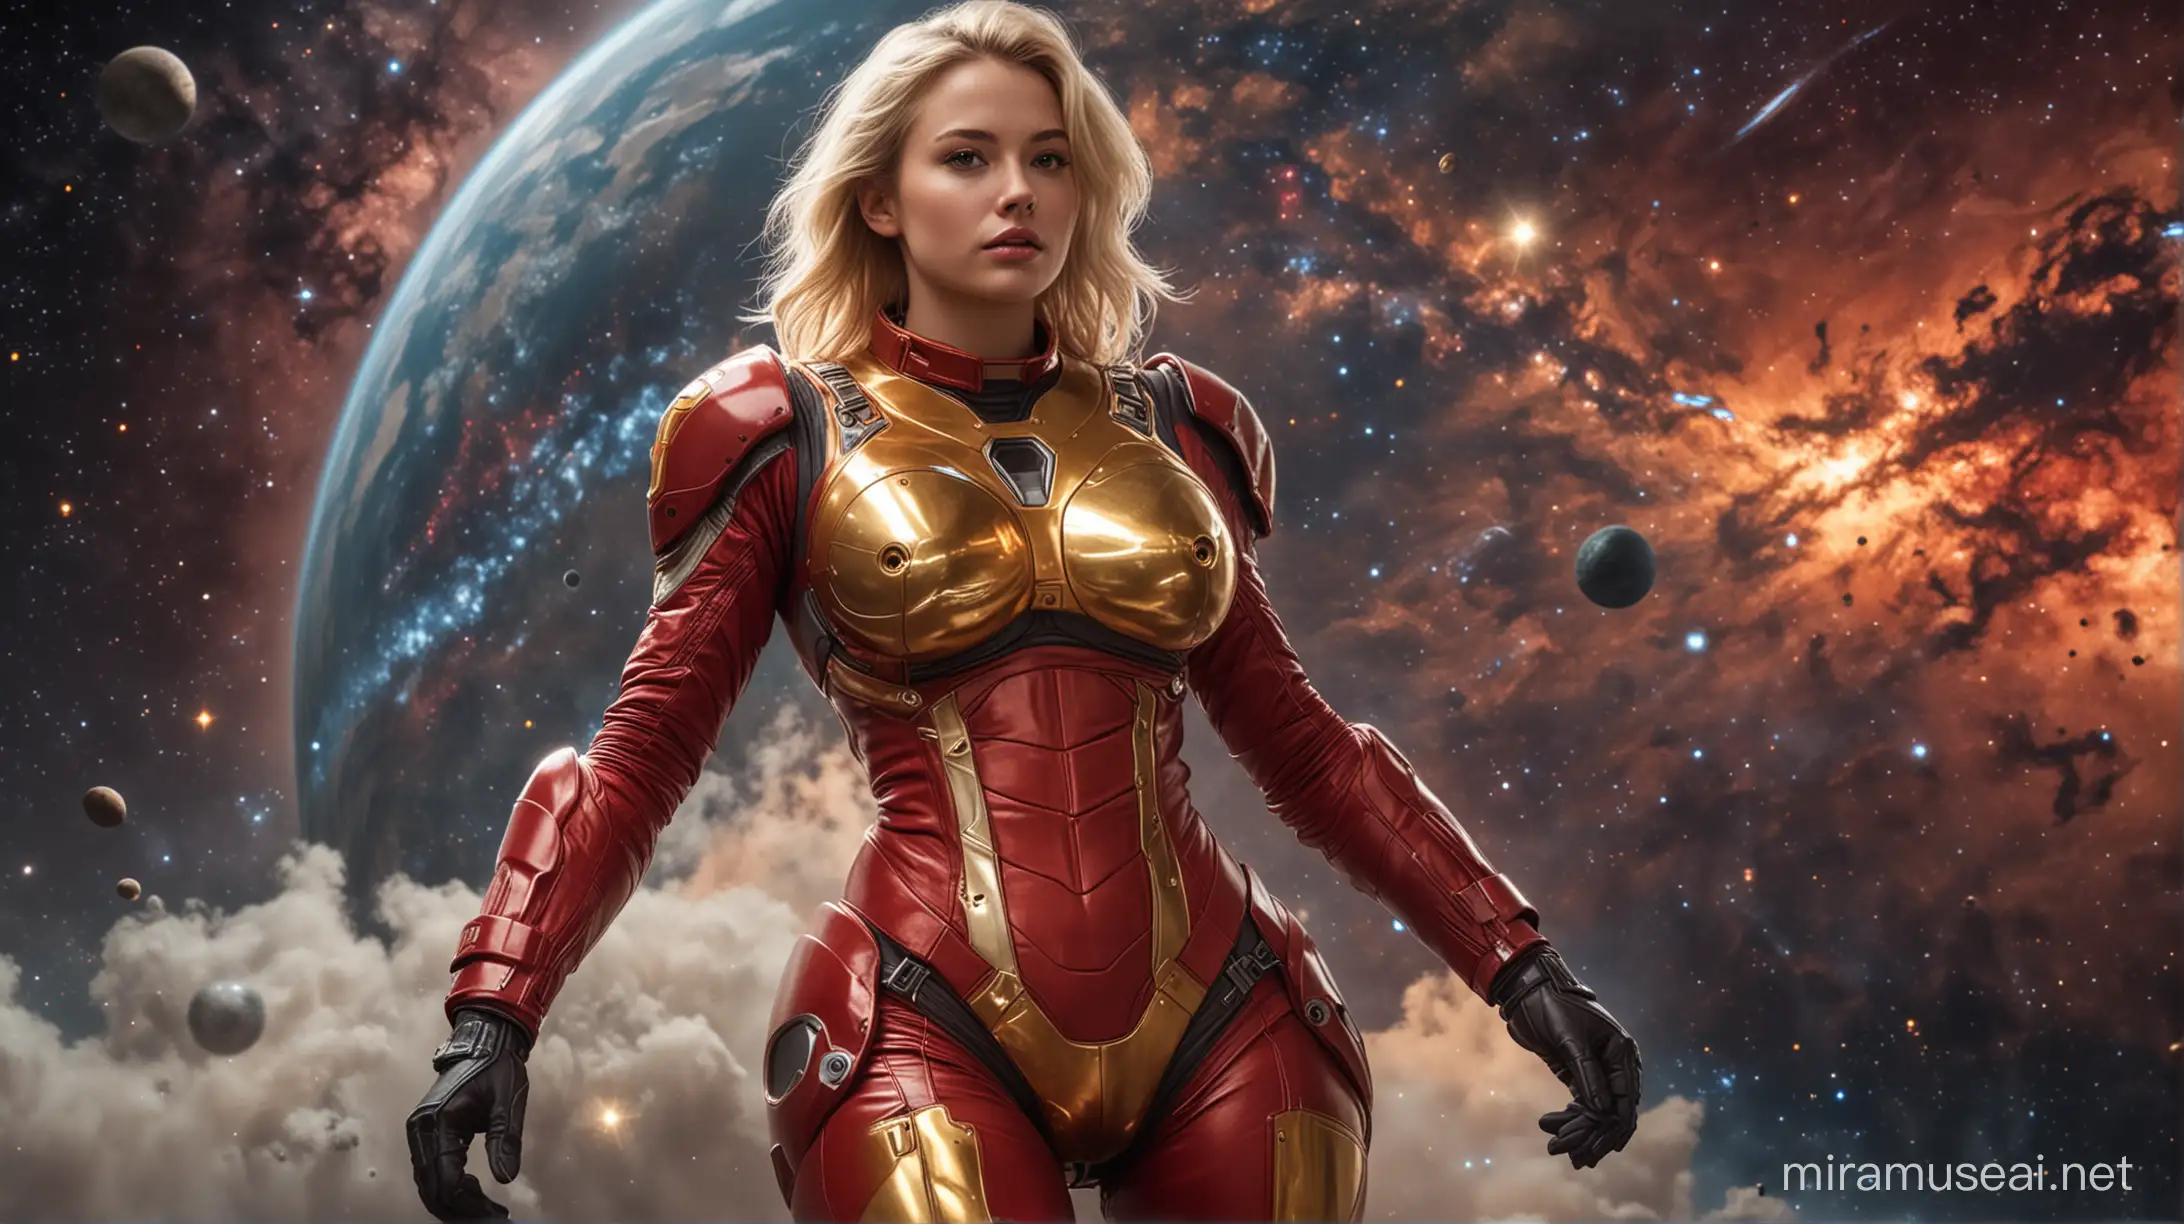 Blonde Woman in Red and Gold Armored Spacesuit Riding Spacebike Amidst Galaxies and Planets